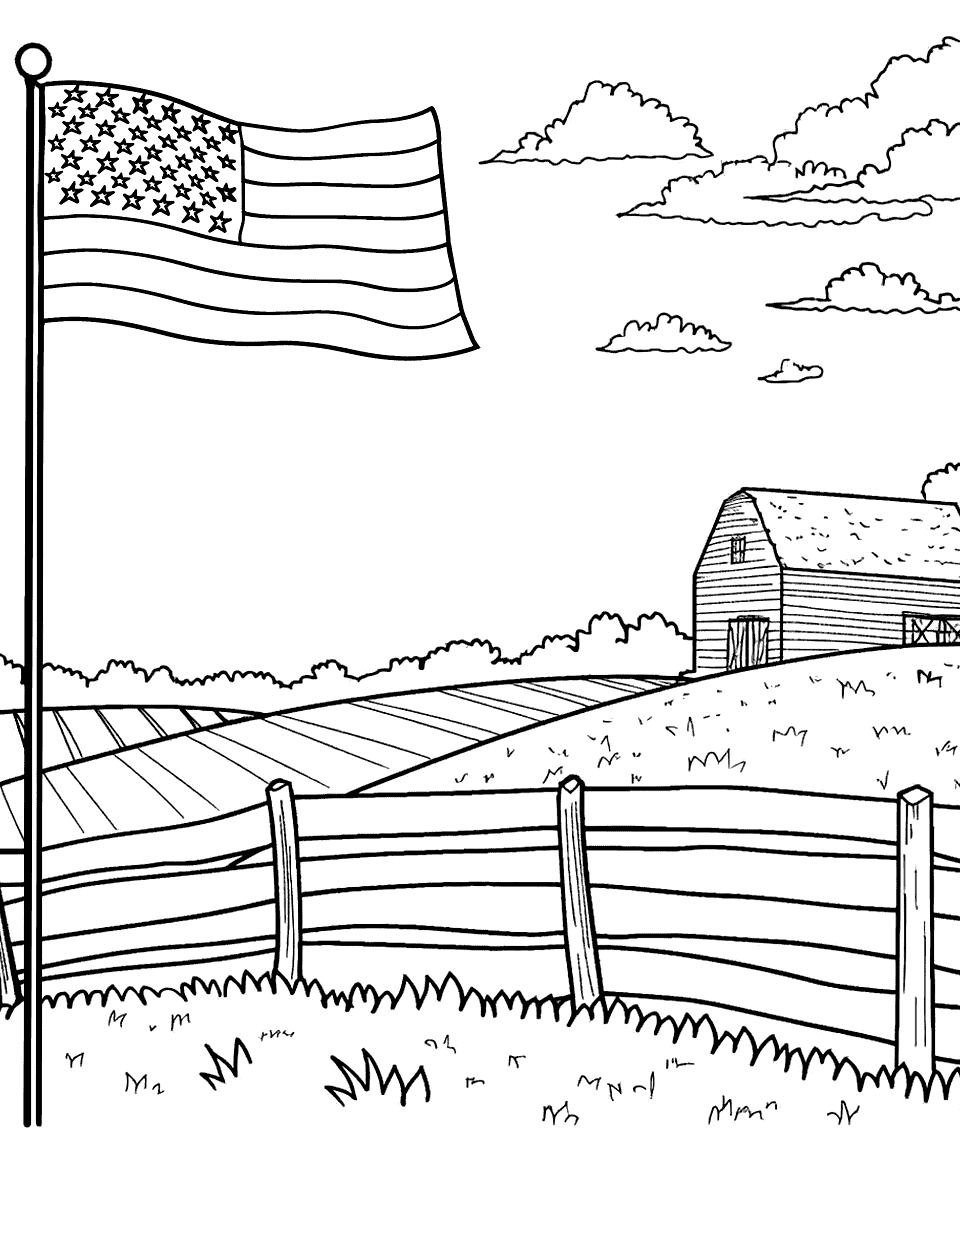 America's Farmlands American Flag Coloring Page - A serene farmland scene with an American flag flying at the farmhouse.